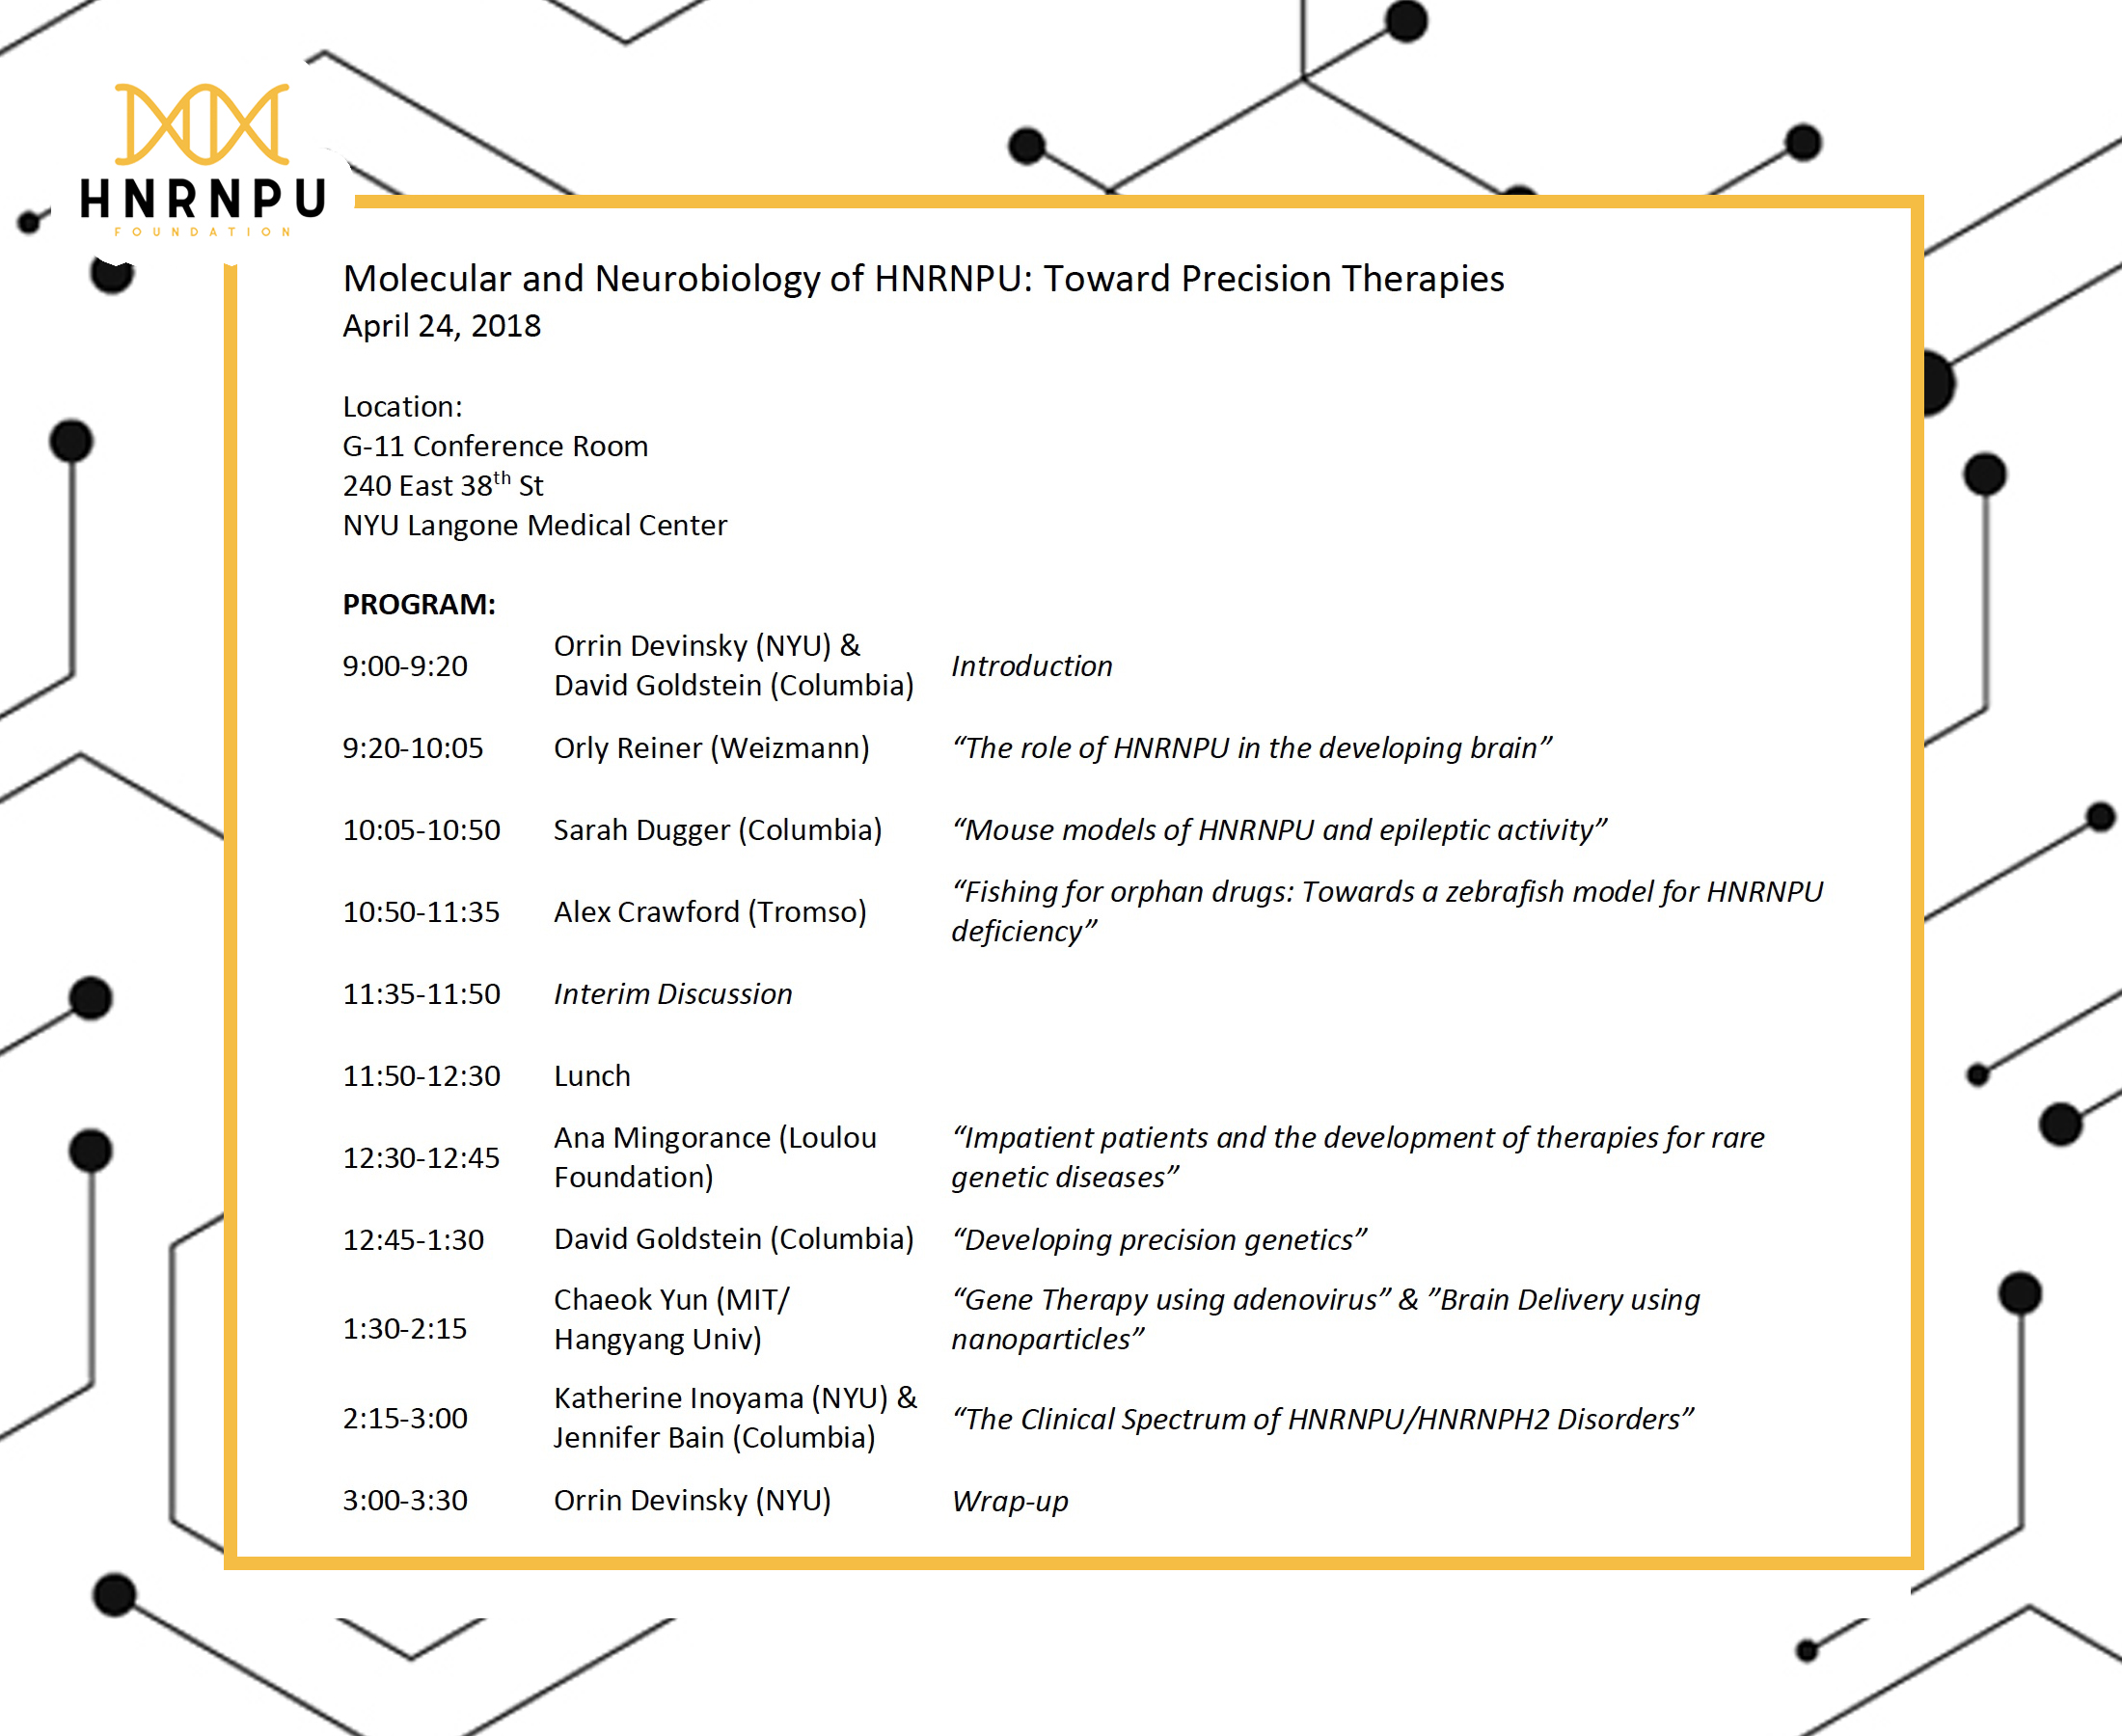 Event: April 24th, 2018: Molecular and Neurobiology of HNRNPU: Toward Precision Therapies